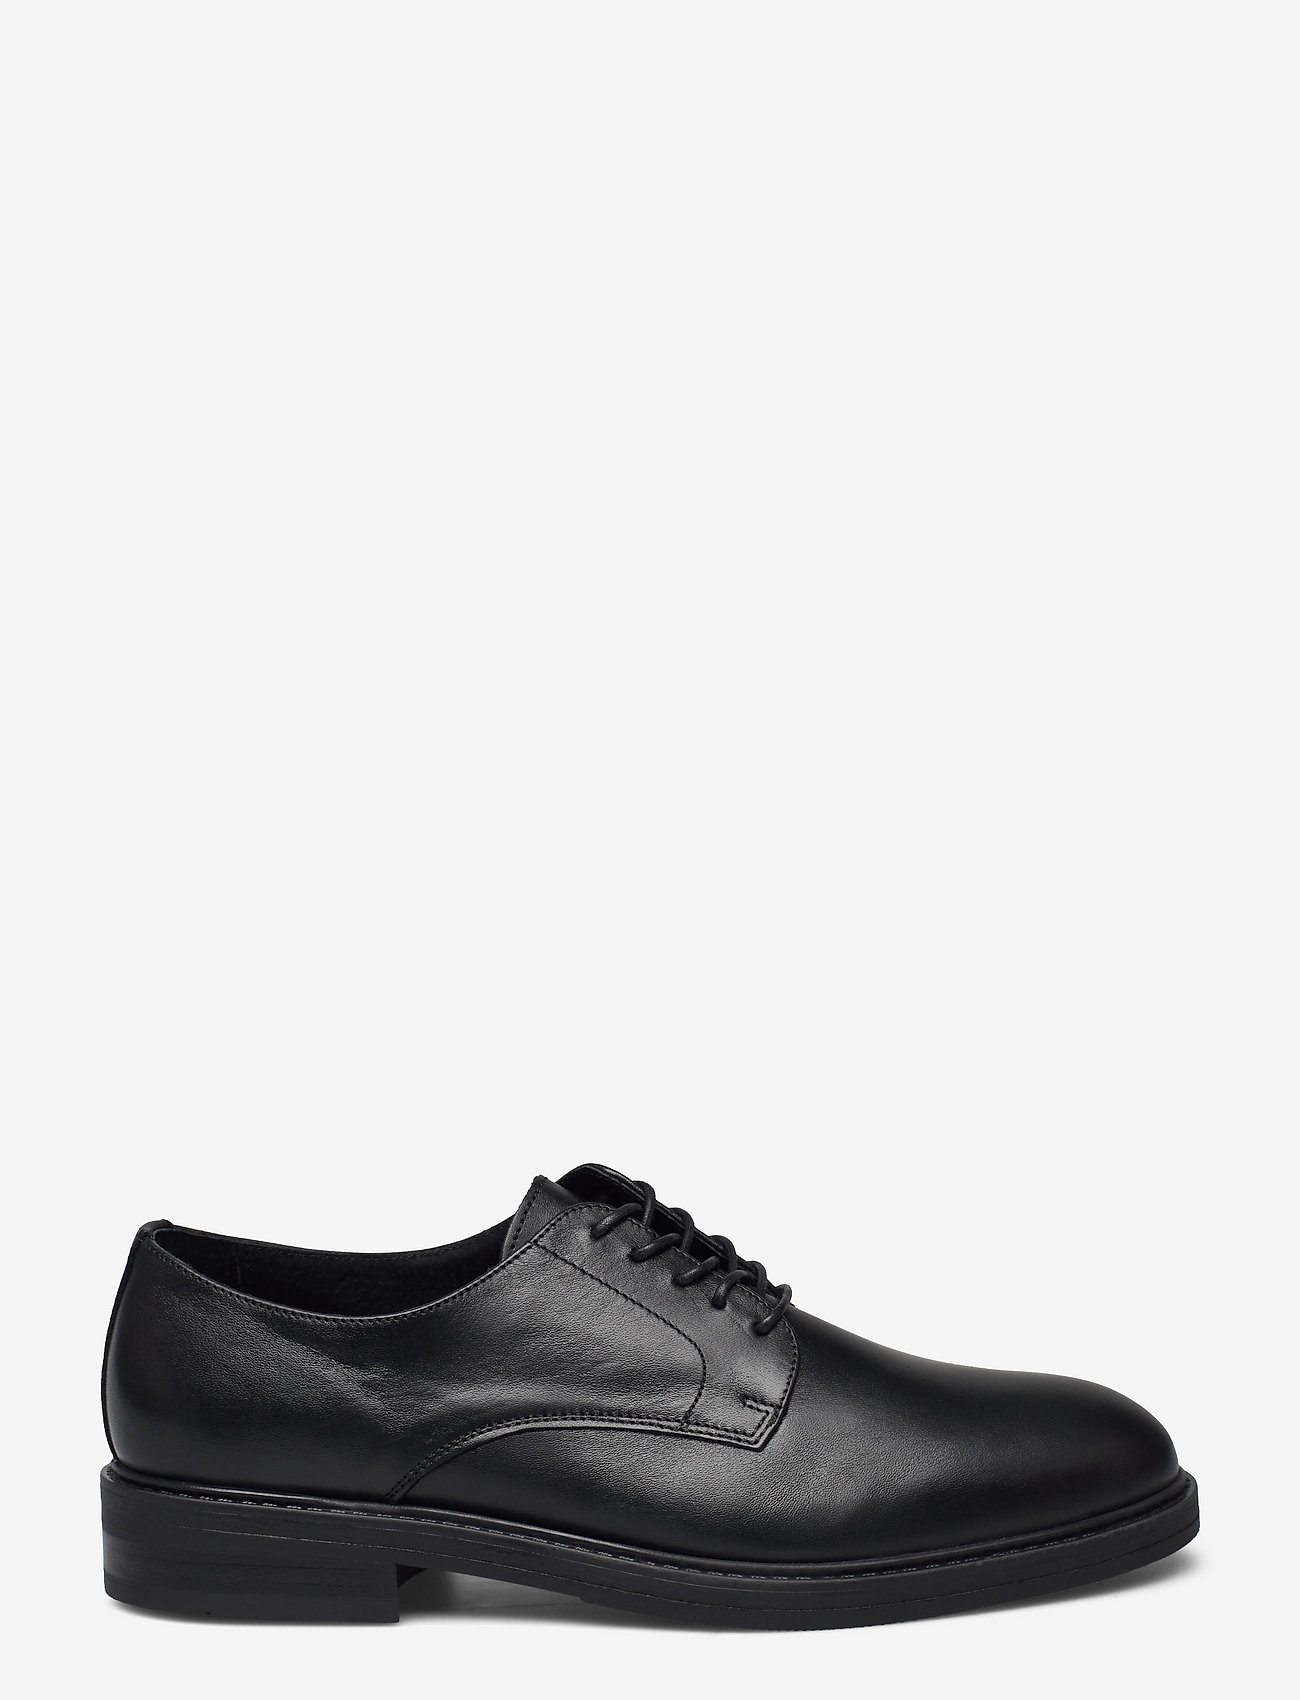 Selected Homme - SLHBLAKE LEATHER DERBY SHOE NOOS O - laced shoes - black - 1